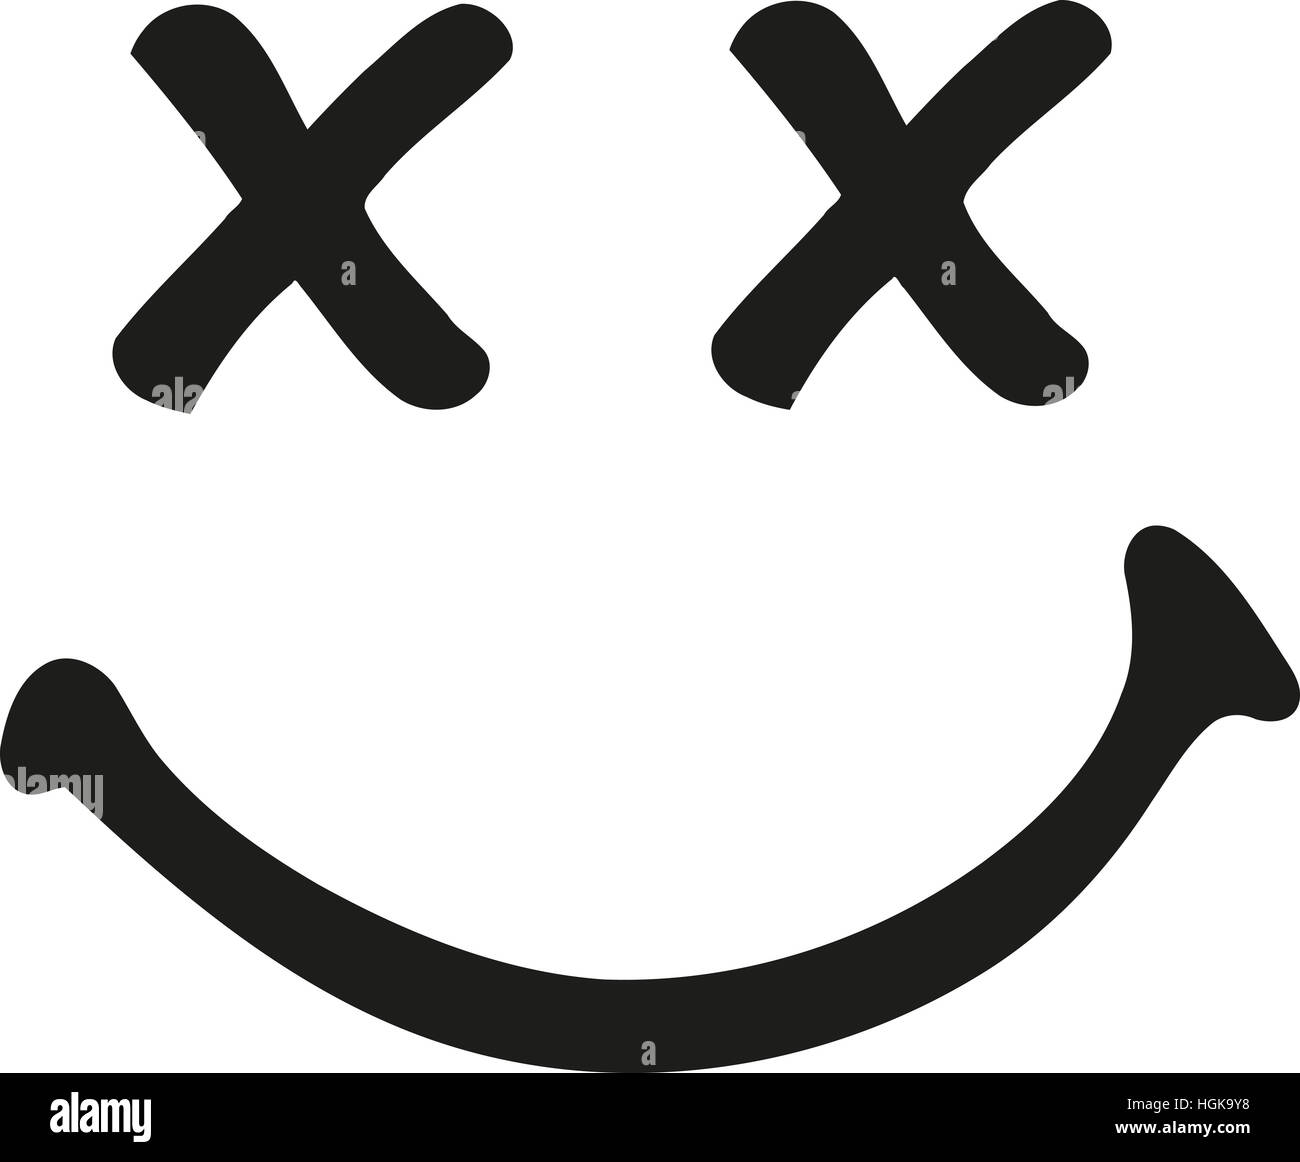 Laughing smiley with crossed eyes Stock Photo